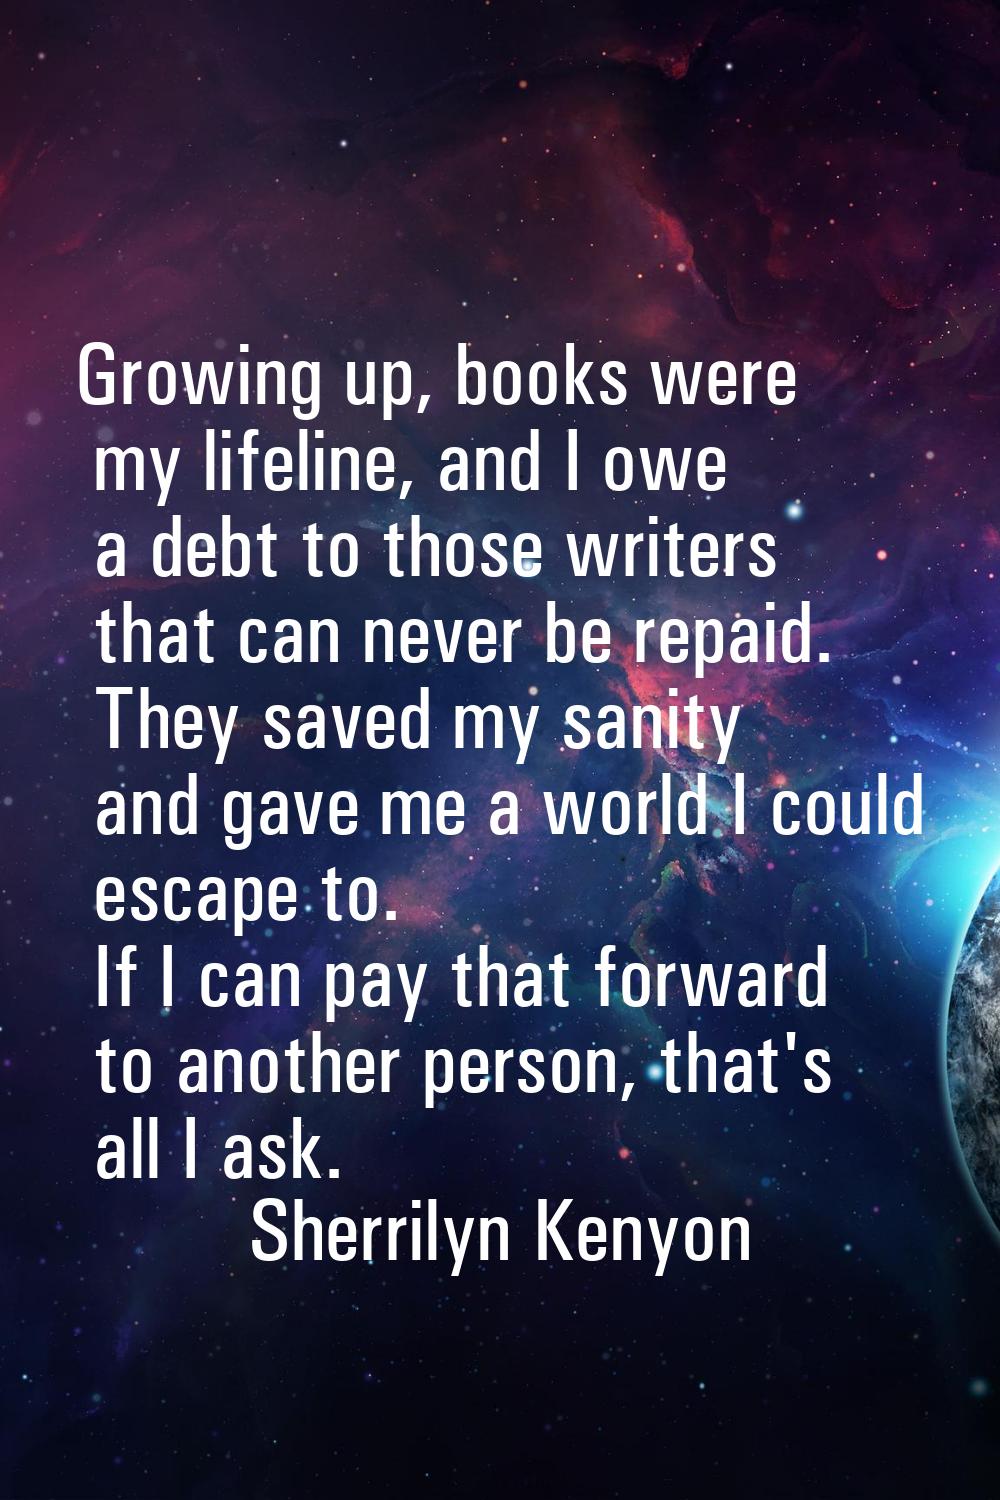 Growing up, books were my lifeline, and I owe a debt to those writers that can never be repaid. The